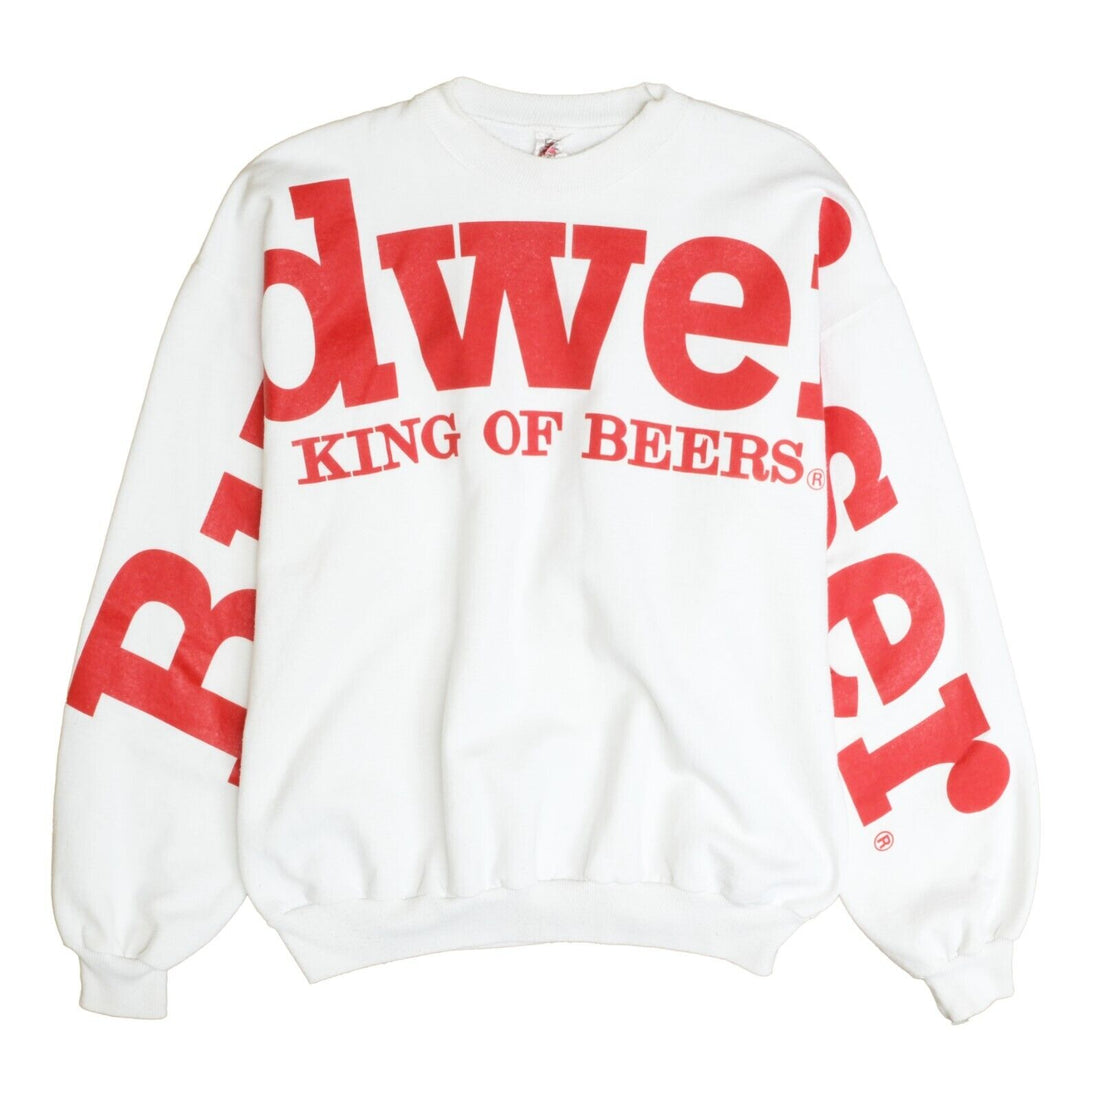 Vintage Budweiser King of Beers Sweatshirt Crewneck Size XL Spell Out Promo